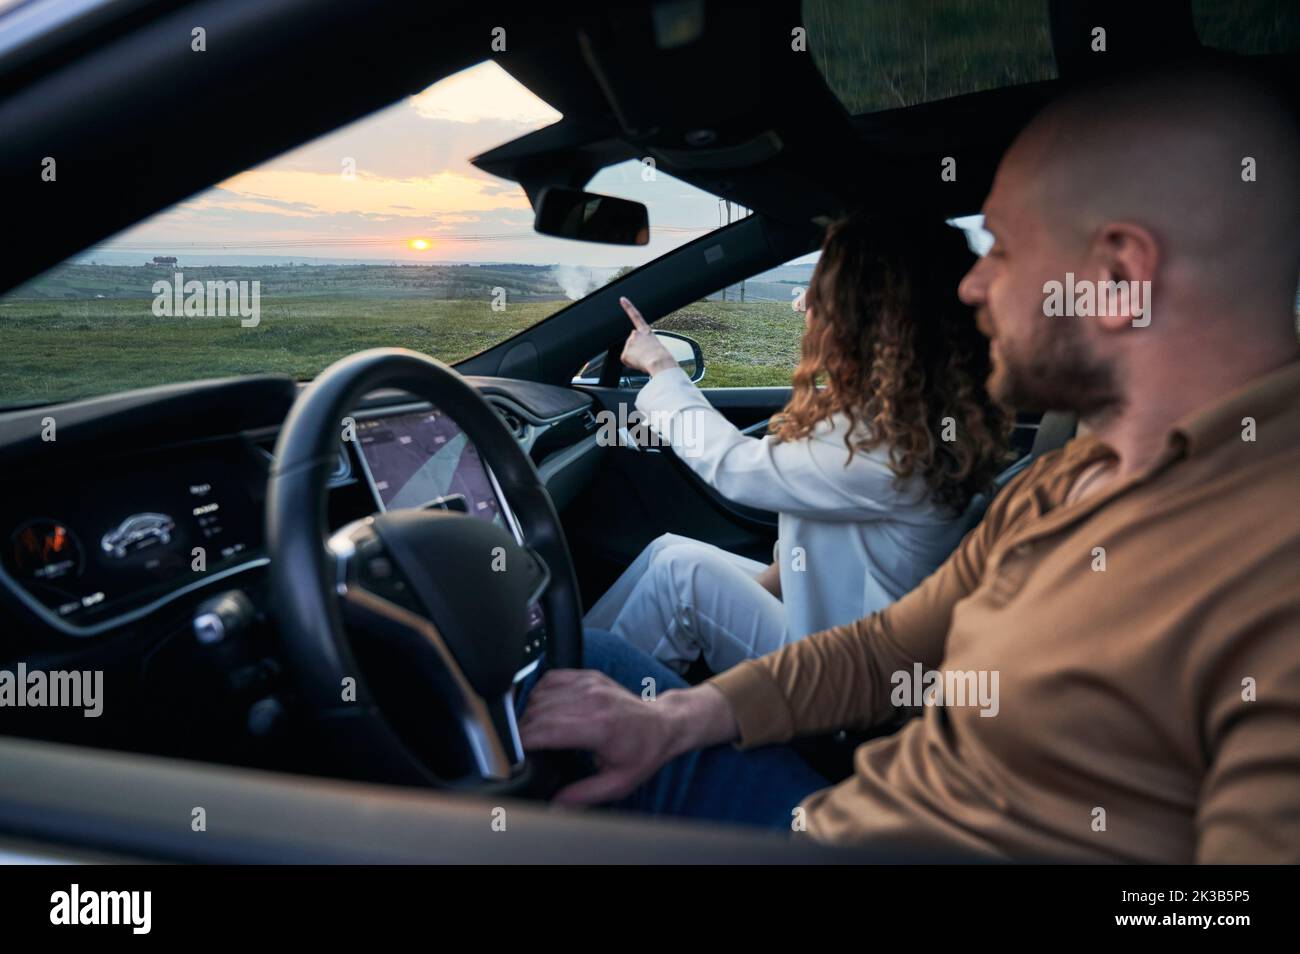 Stylish young woman sitting on passenger seat and pointing finger at sunset while man driving electric car. Female traveler sitting in automobile next to driver and gesturing towards beautiful sky. Stock Photo